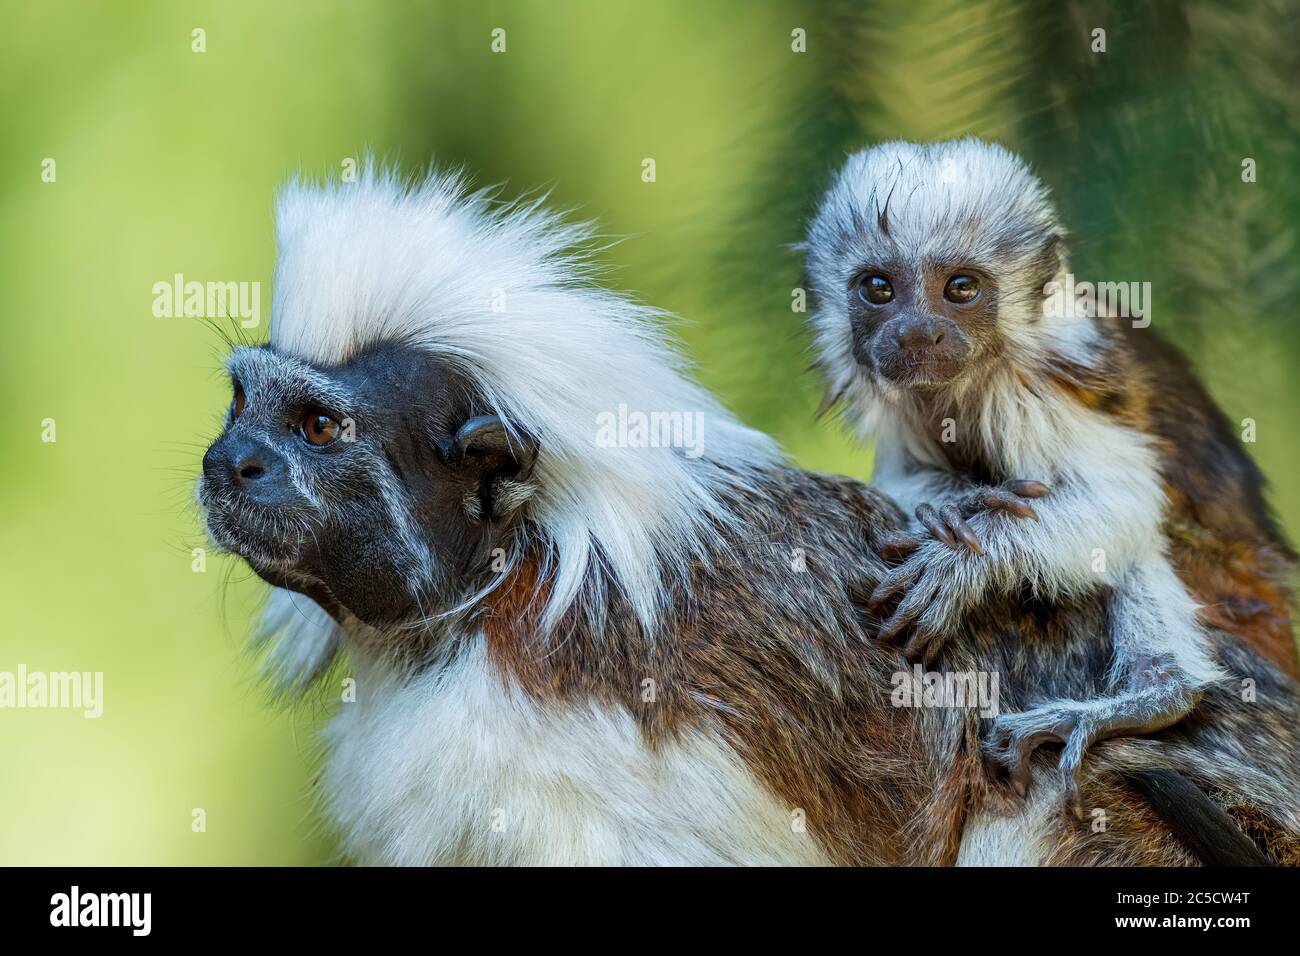 Cotton-top Tamarin - Saguinus oedipus, beautiful small primate from South American tropical forests, Colombia. Stock Photo